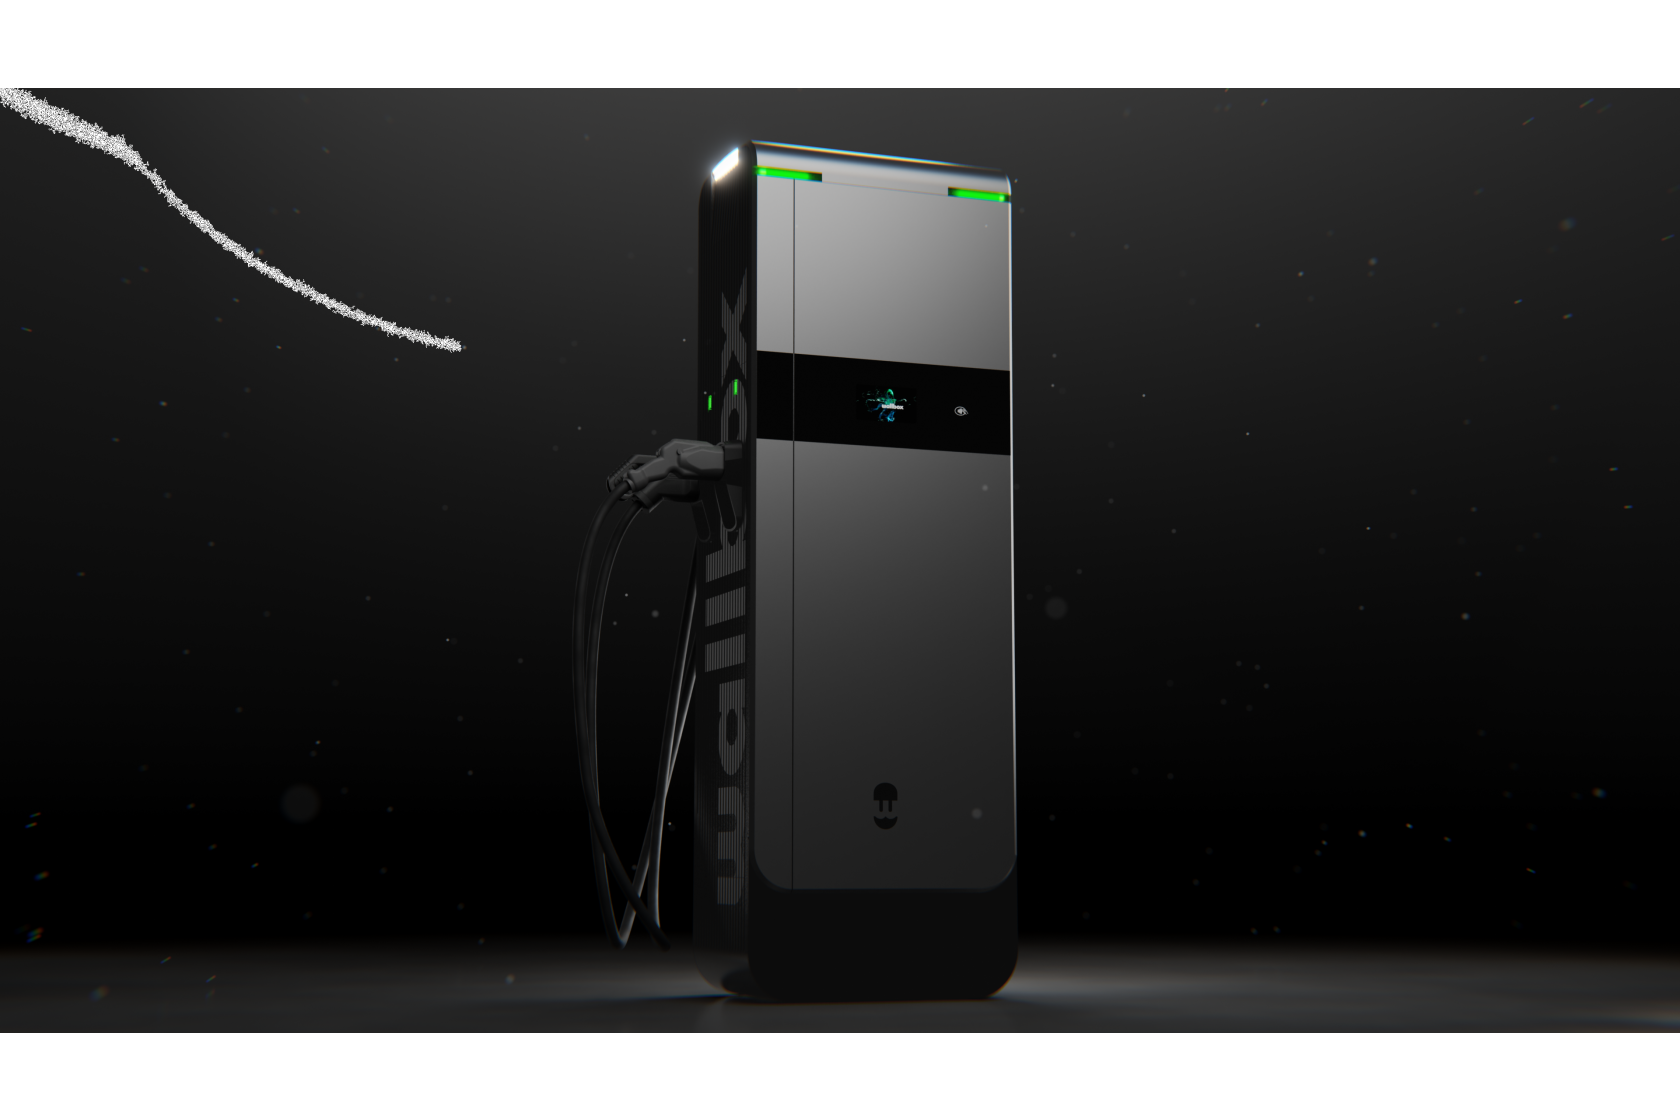 Wallbox introduces Supernova, its first public charger that will change the market with a more efficient and more reliable product for half the price of its competitors